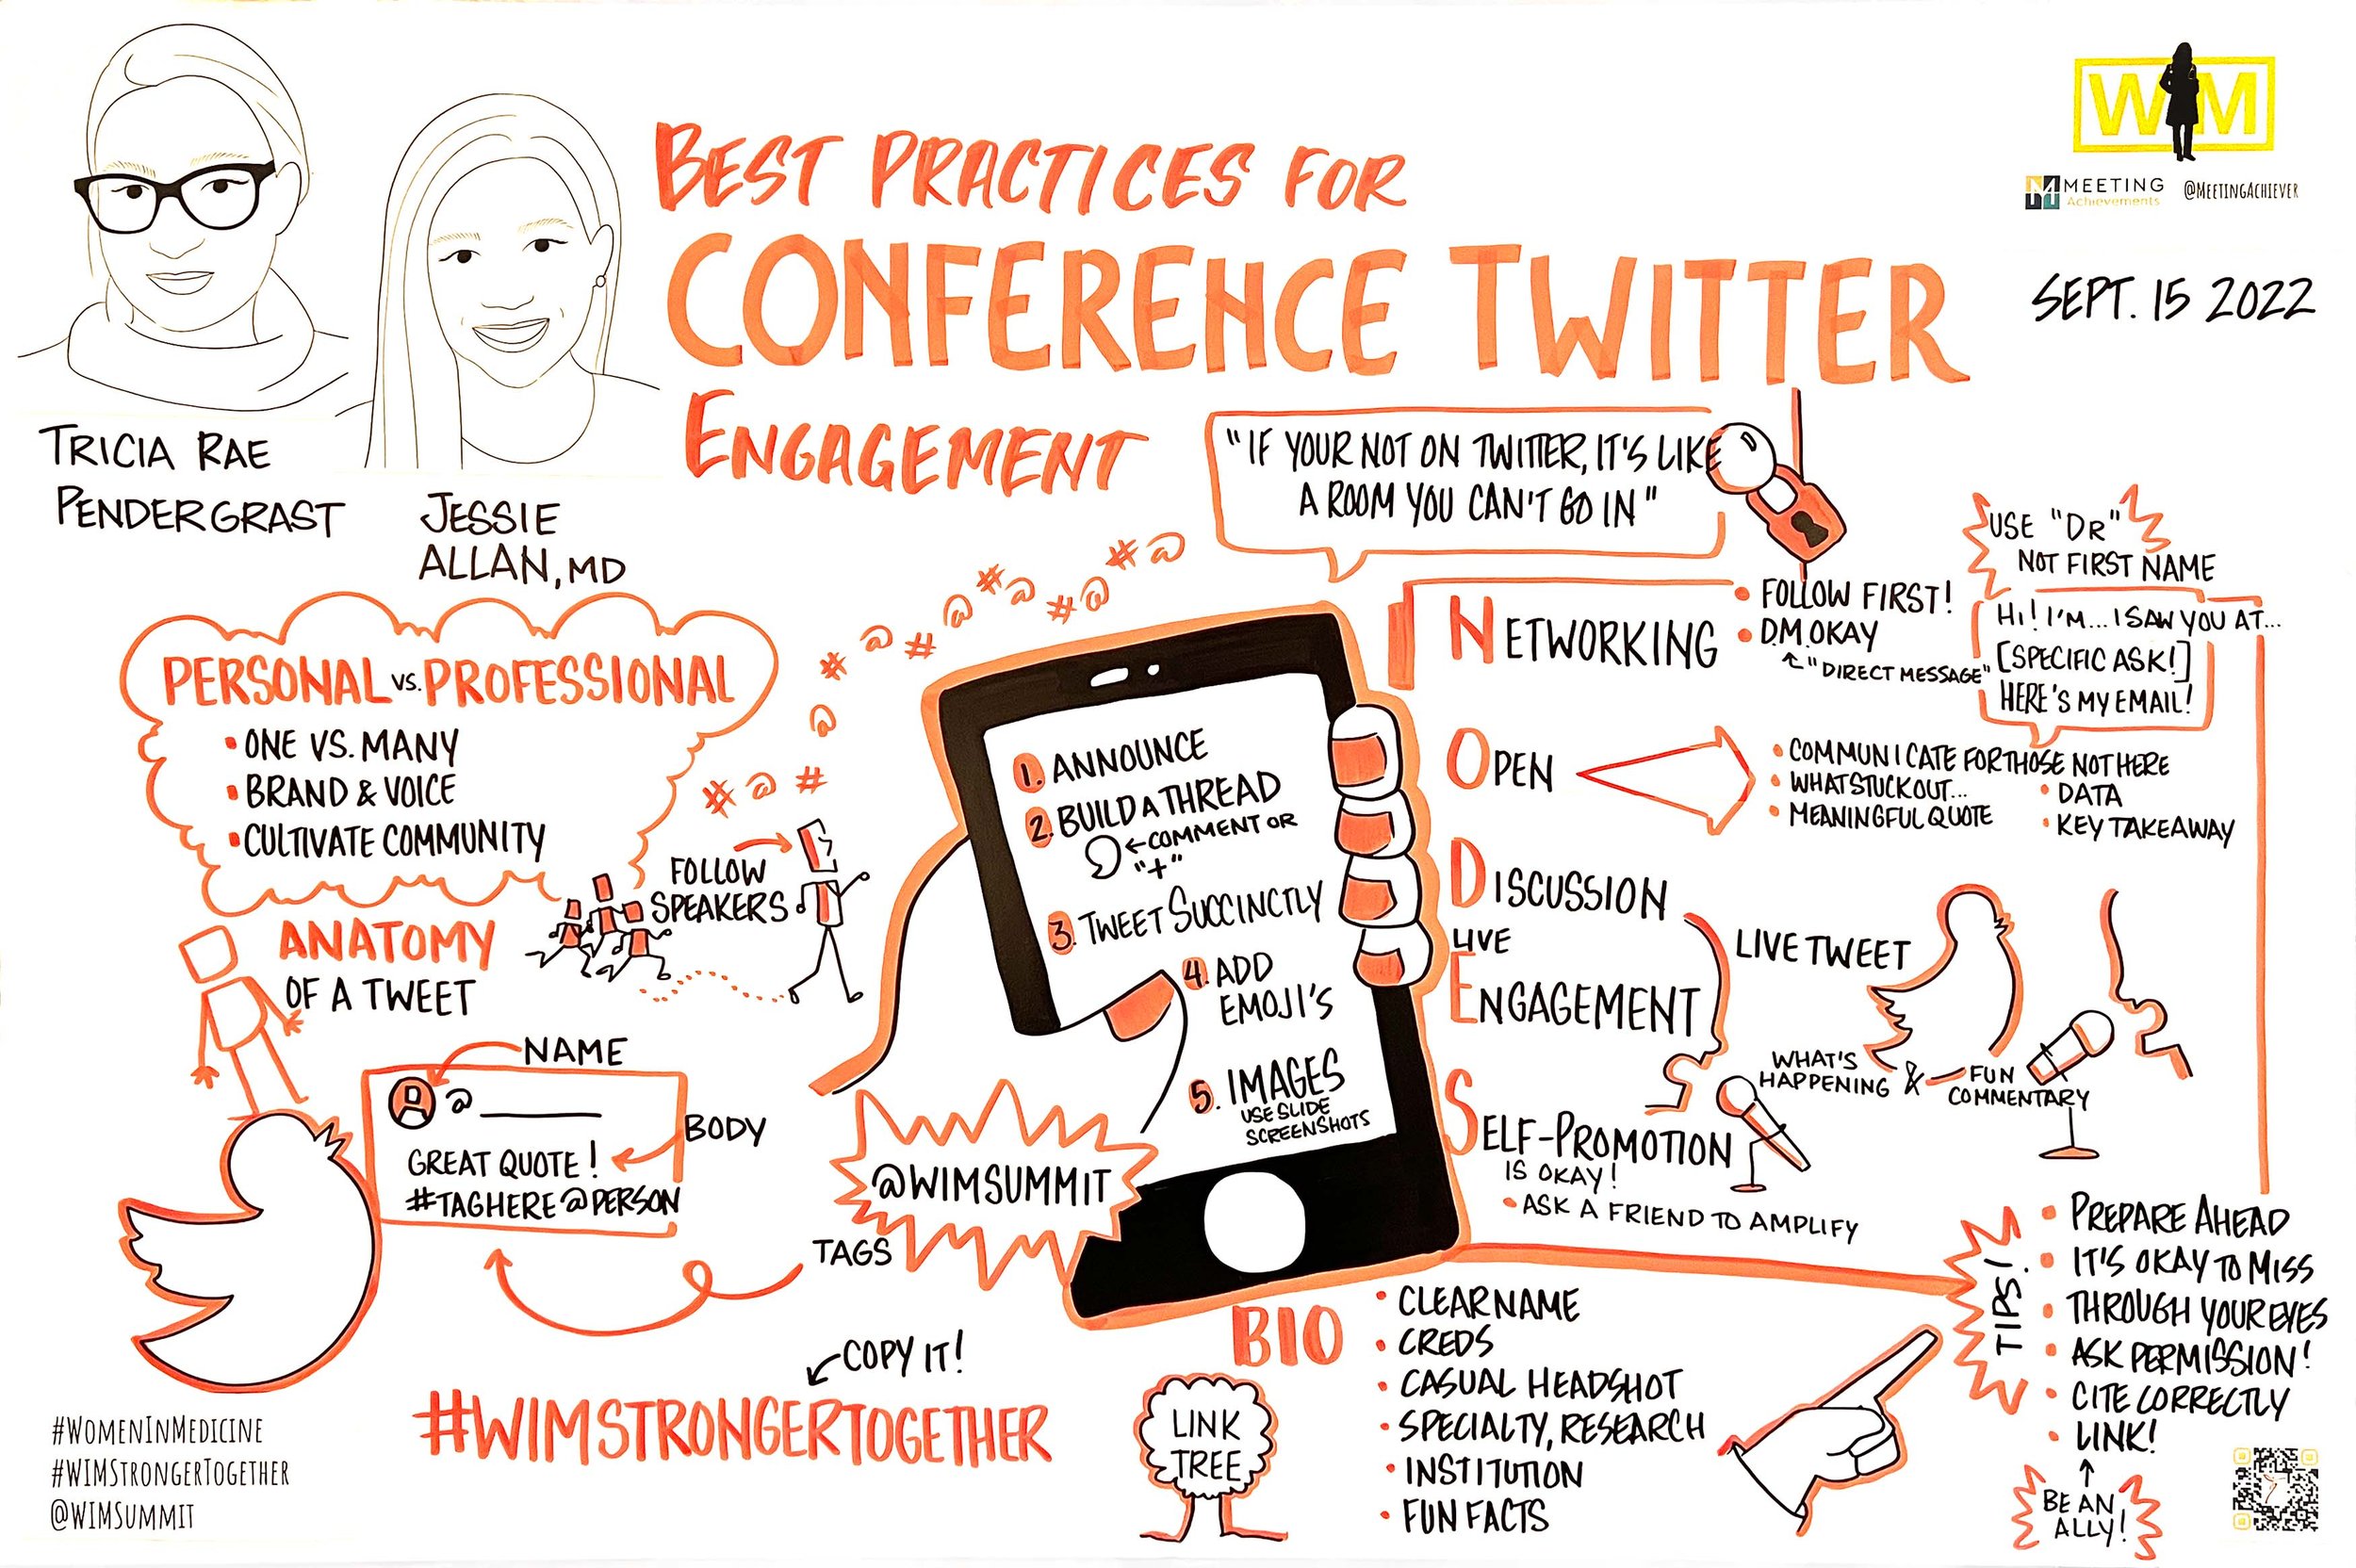 1_Meeting Achievements_WiM 2022_Best Practices for Conference Twitter Engagement_20220915.jpg